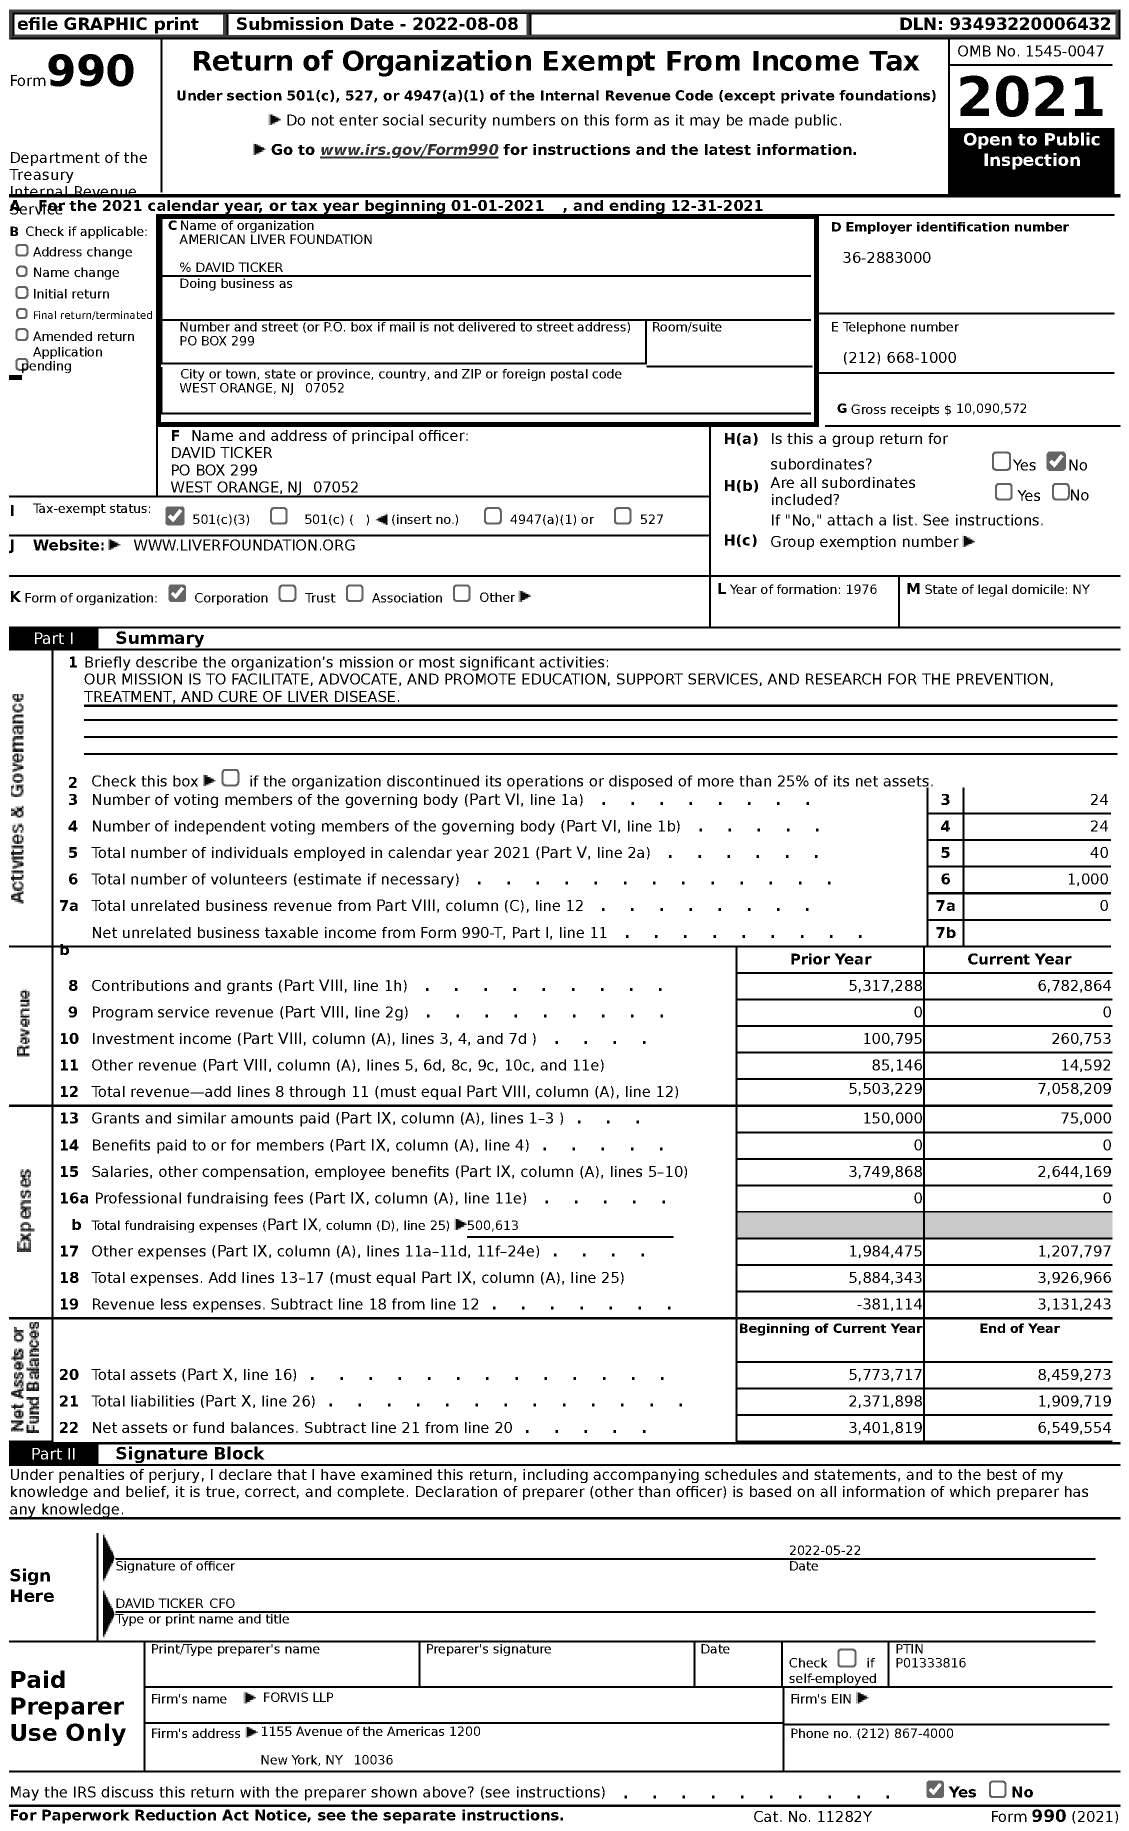 Image of first page of 2021 Form 990 for American Liver Foundation (ALF)